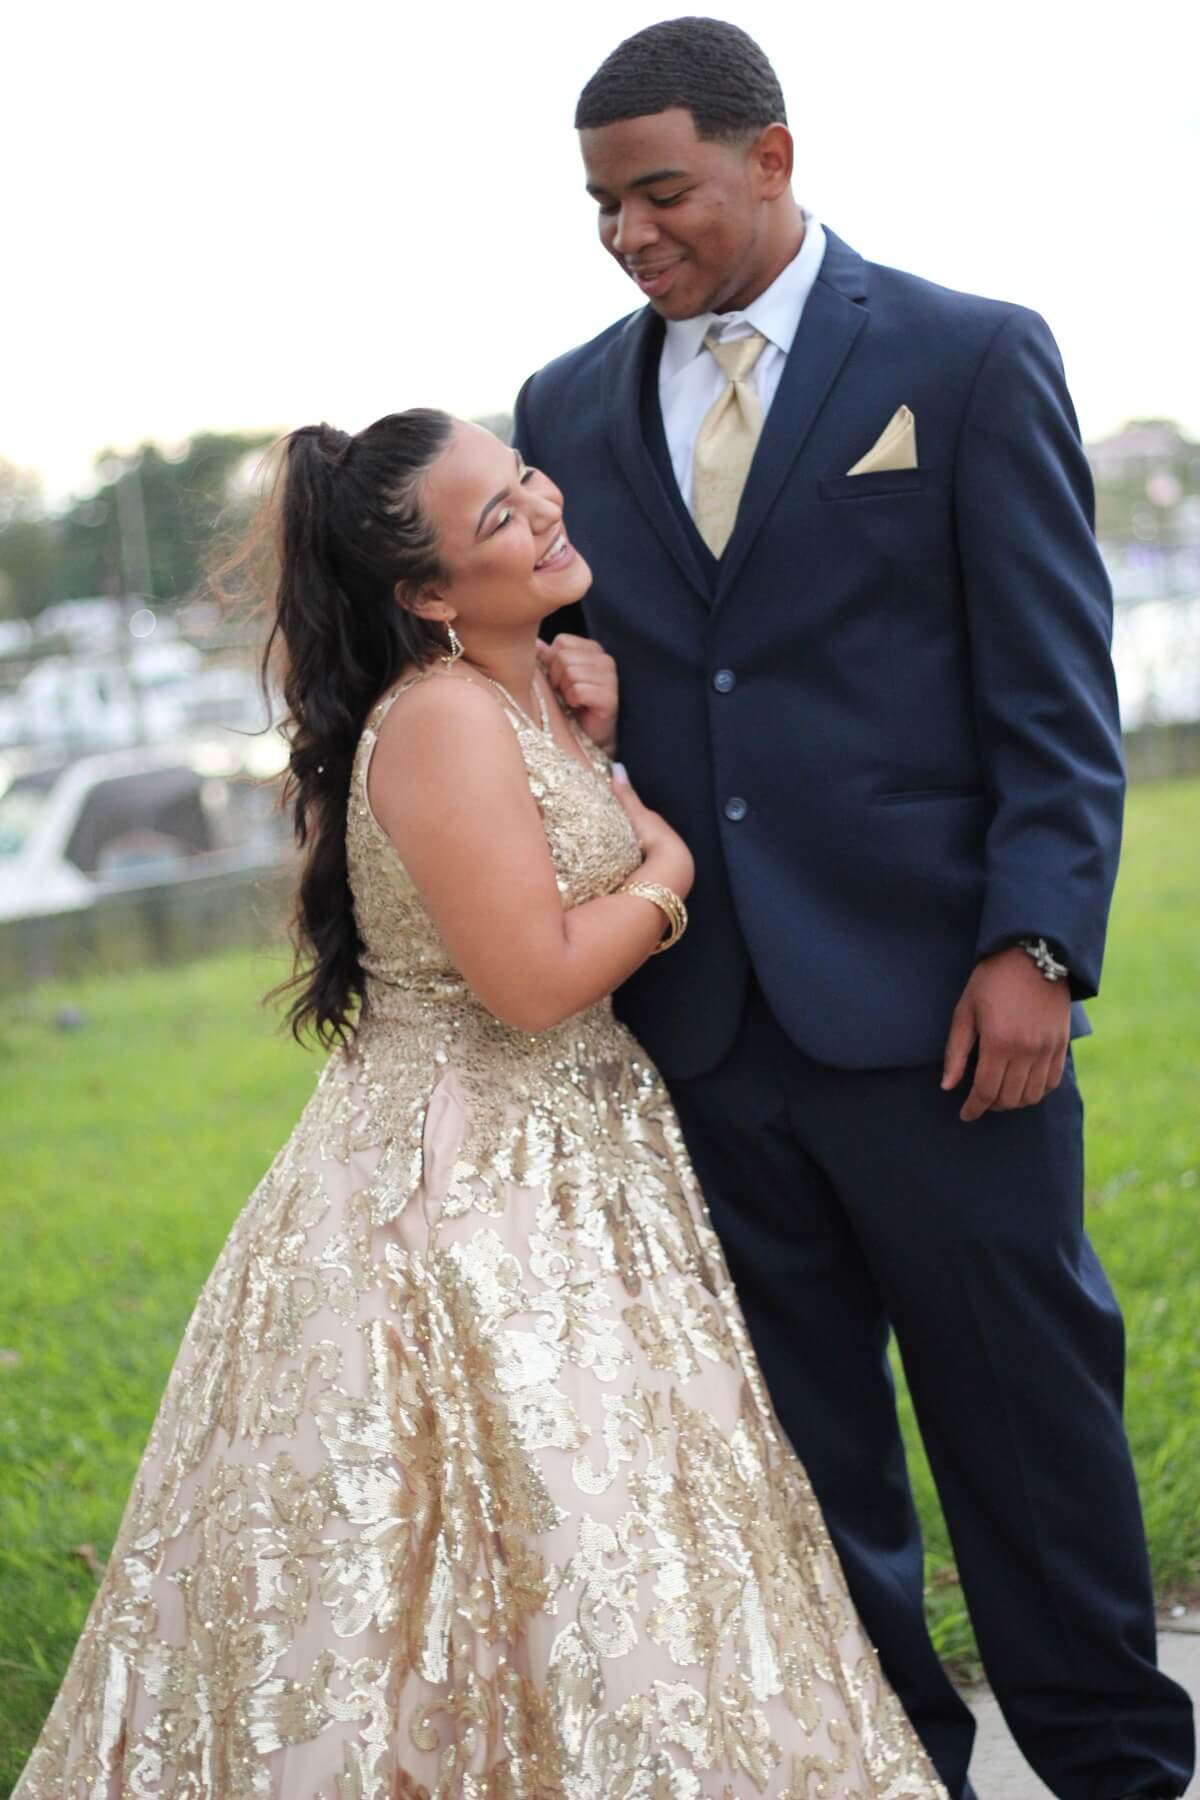 Size 8 Prom Gold Ball Gown on Queenly